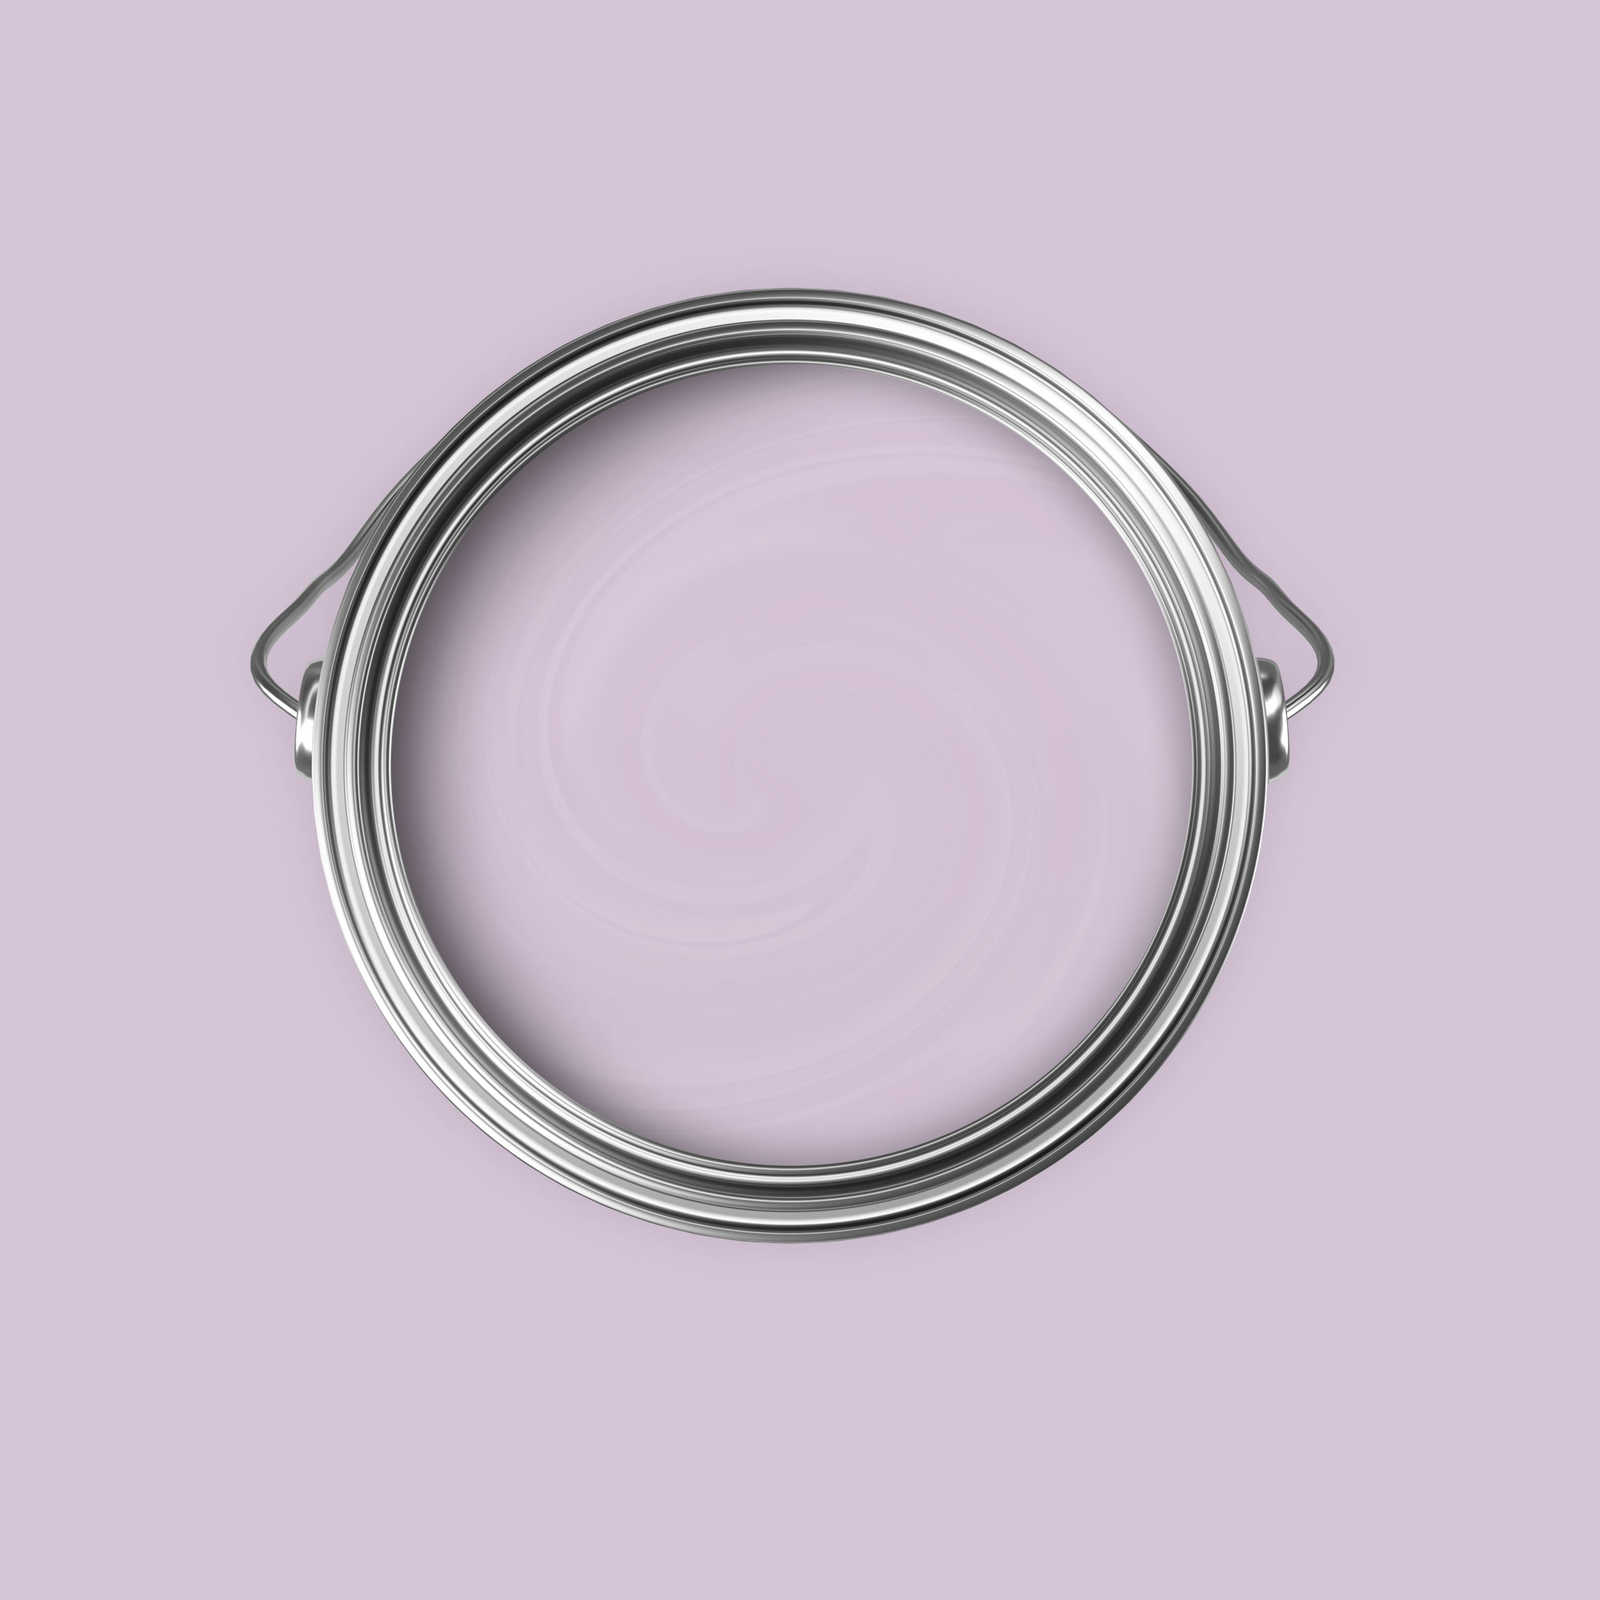             Premium Wall Paint delicate lilac »Beautiful Berry« NW207 – 5 litre
        